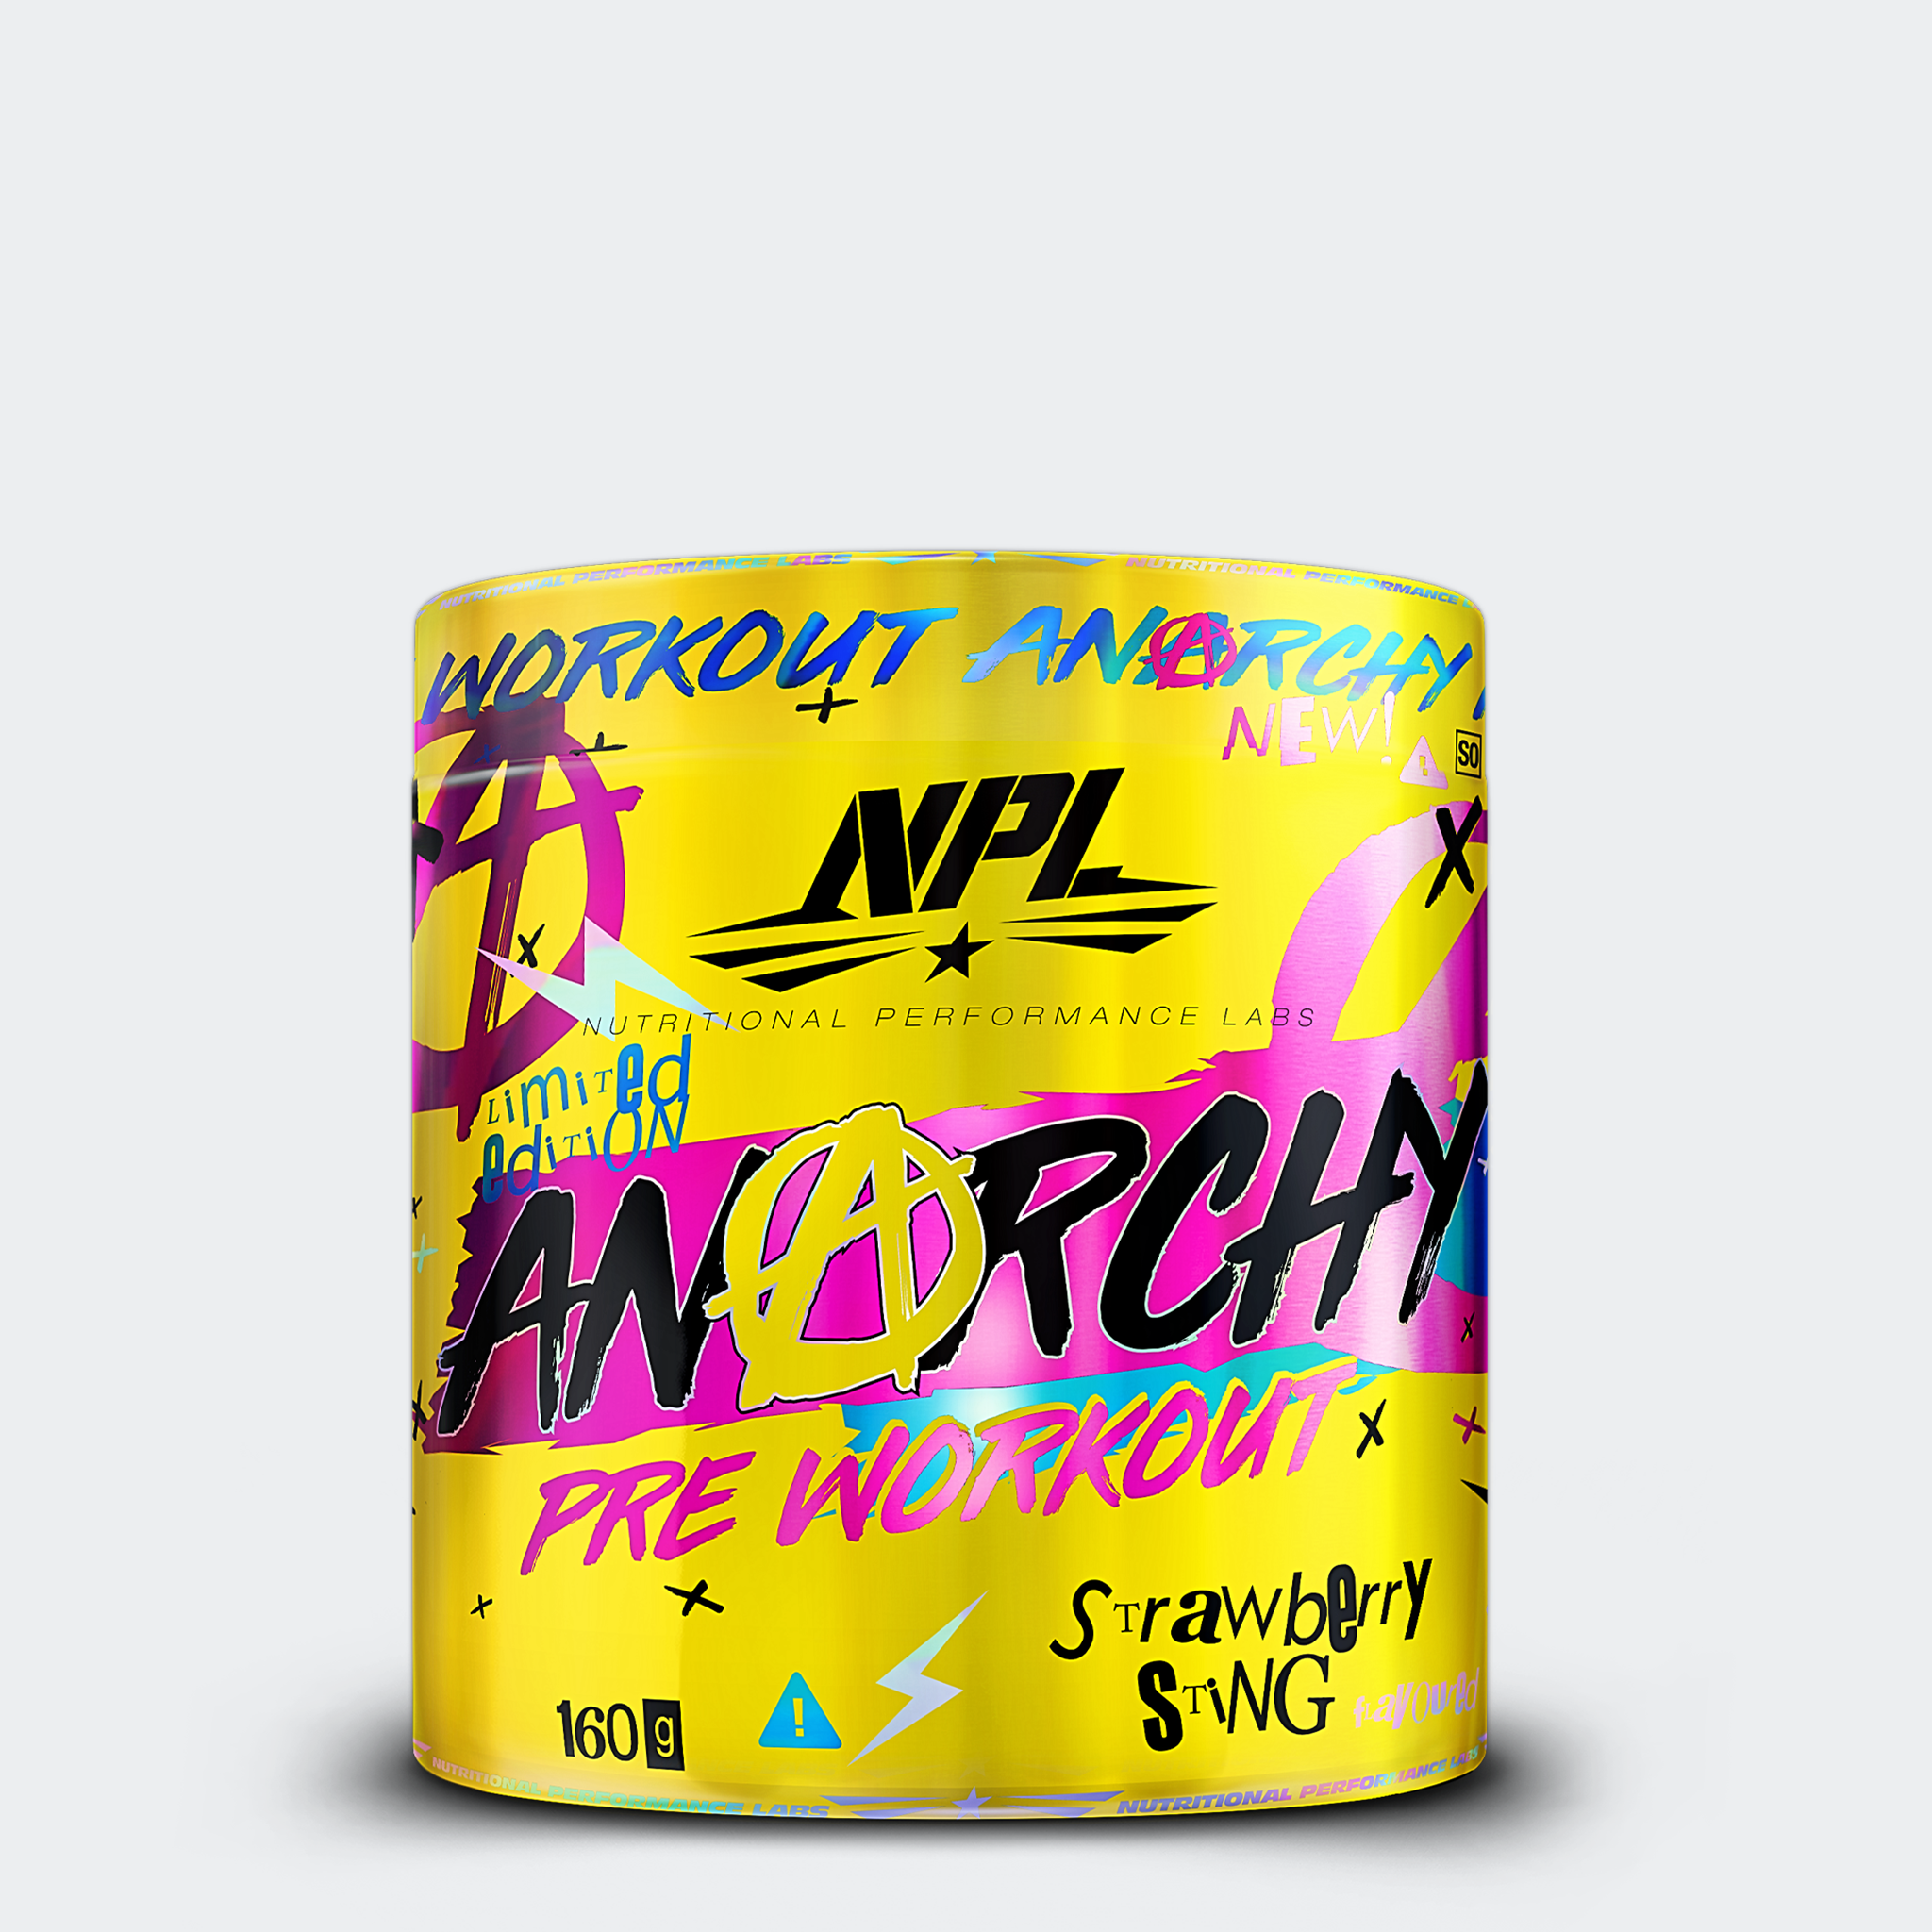 NPL Anarchy fully loaded pre-workout for enhanced performance - Strawberry sting flavour